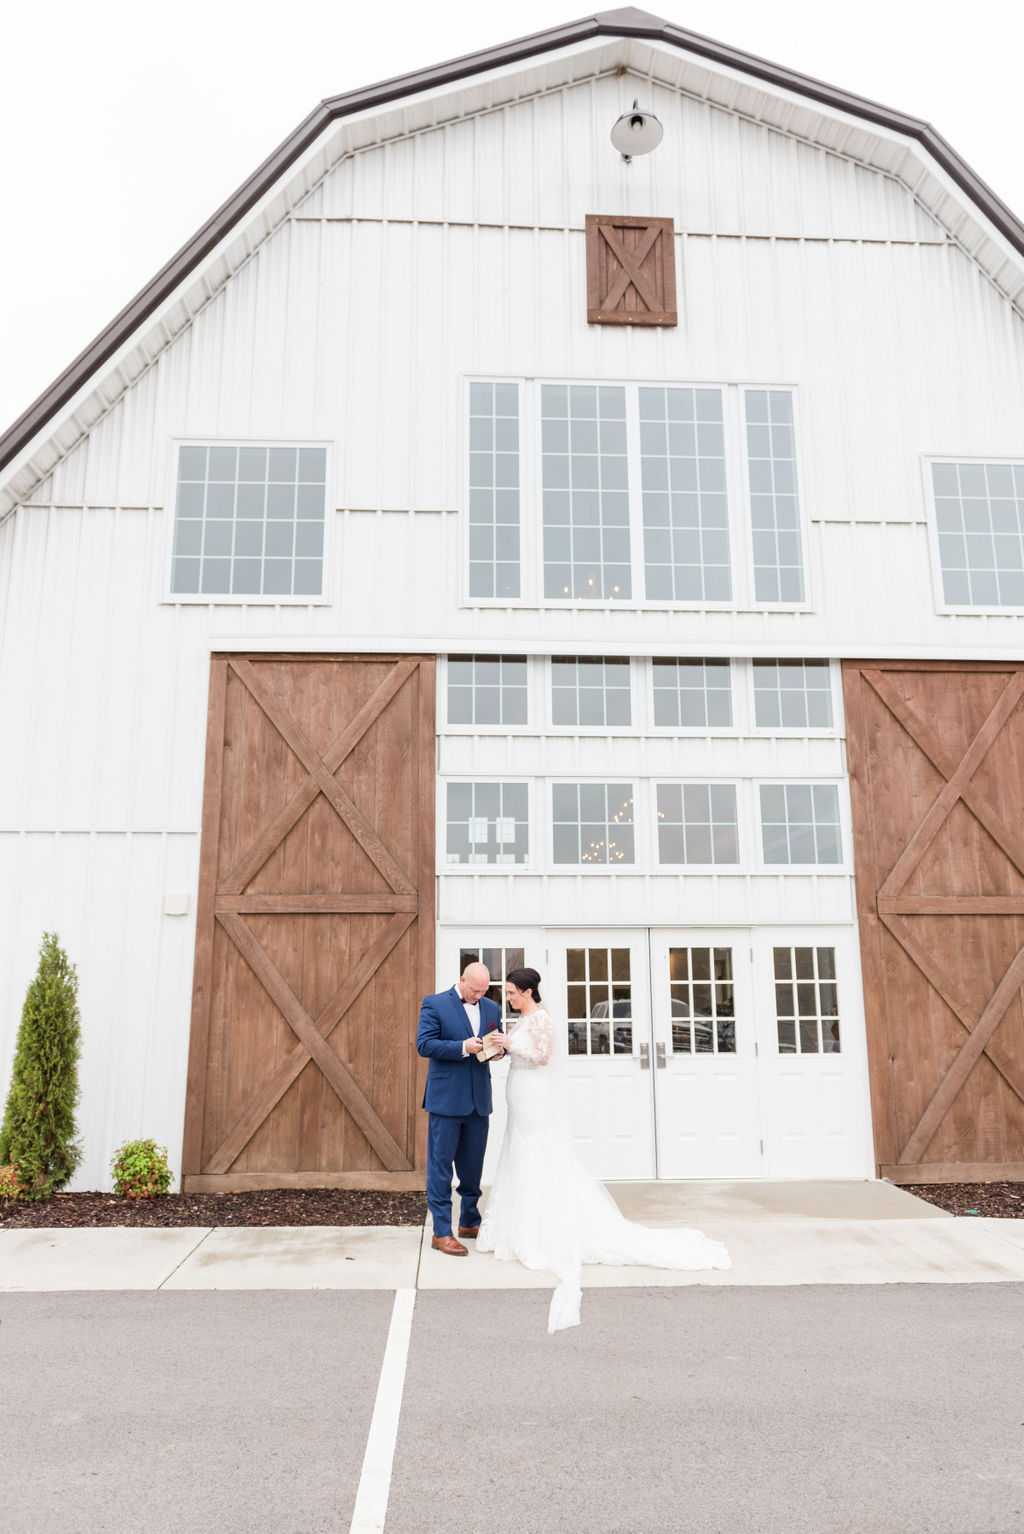 Fall Wedding at The Chapel in Gallatin, Tennessee, Rebecca Musayev Photography is a wedding photographer serving the Nashville, Tennessee area and destination locations.